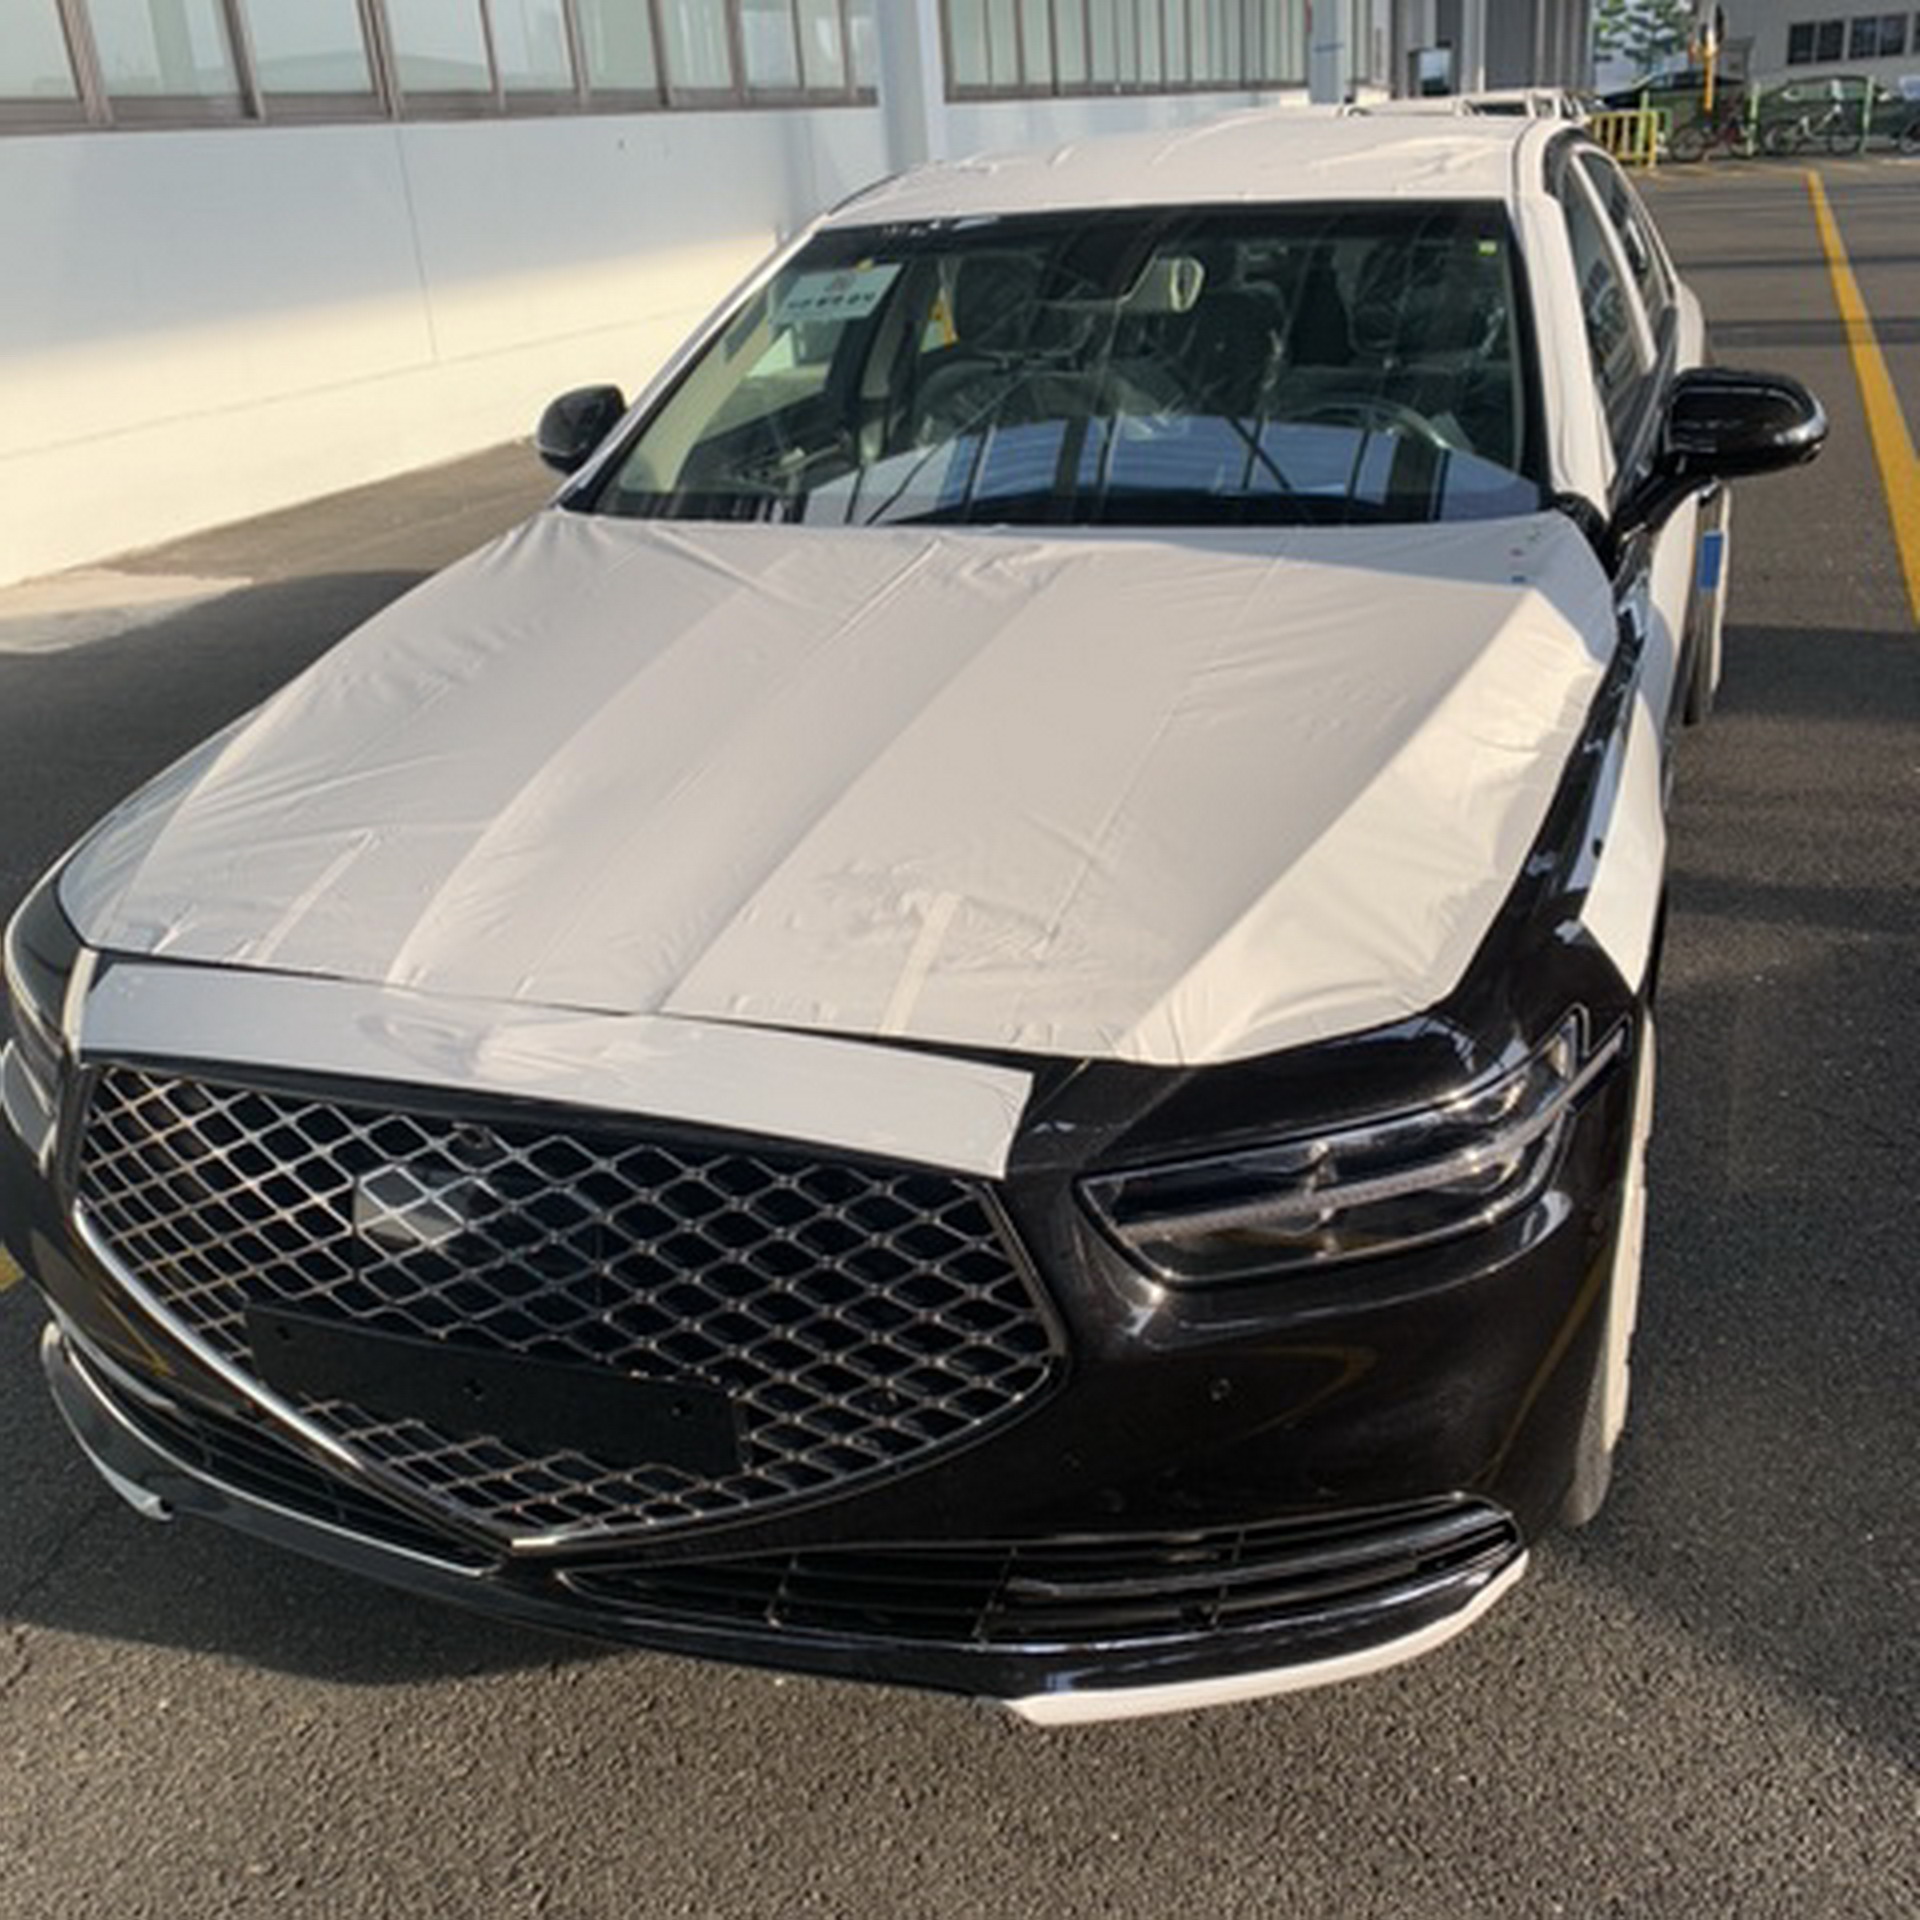 2019 Genesis G90 Spotted With Minimal Disguise, Superman-Like Grille |  Carscoops